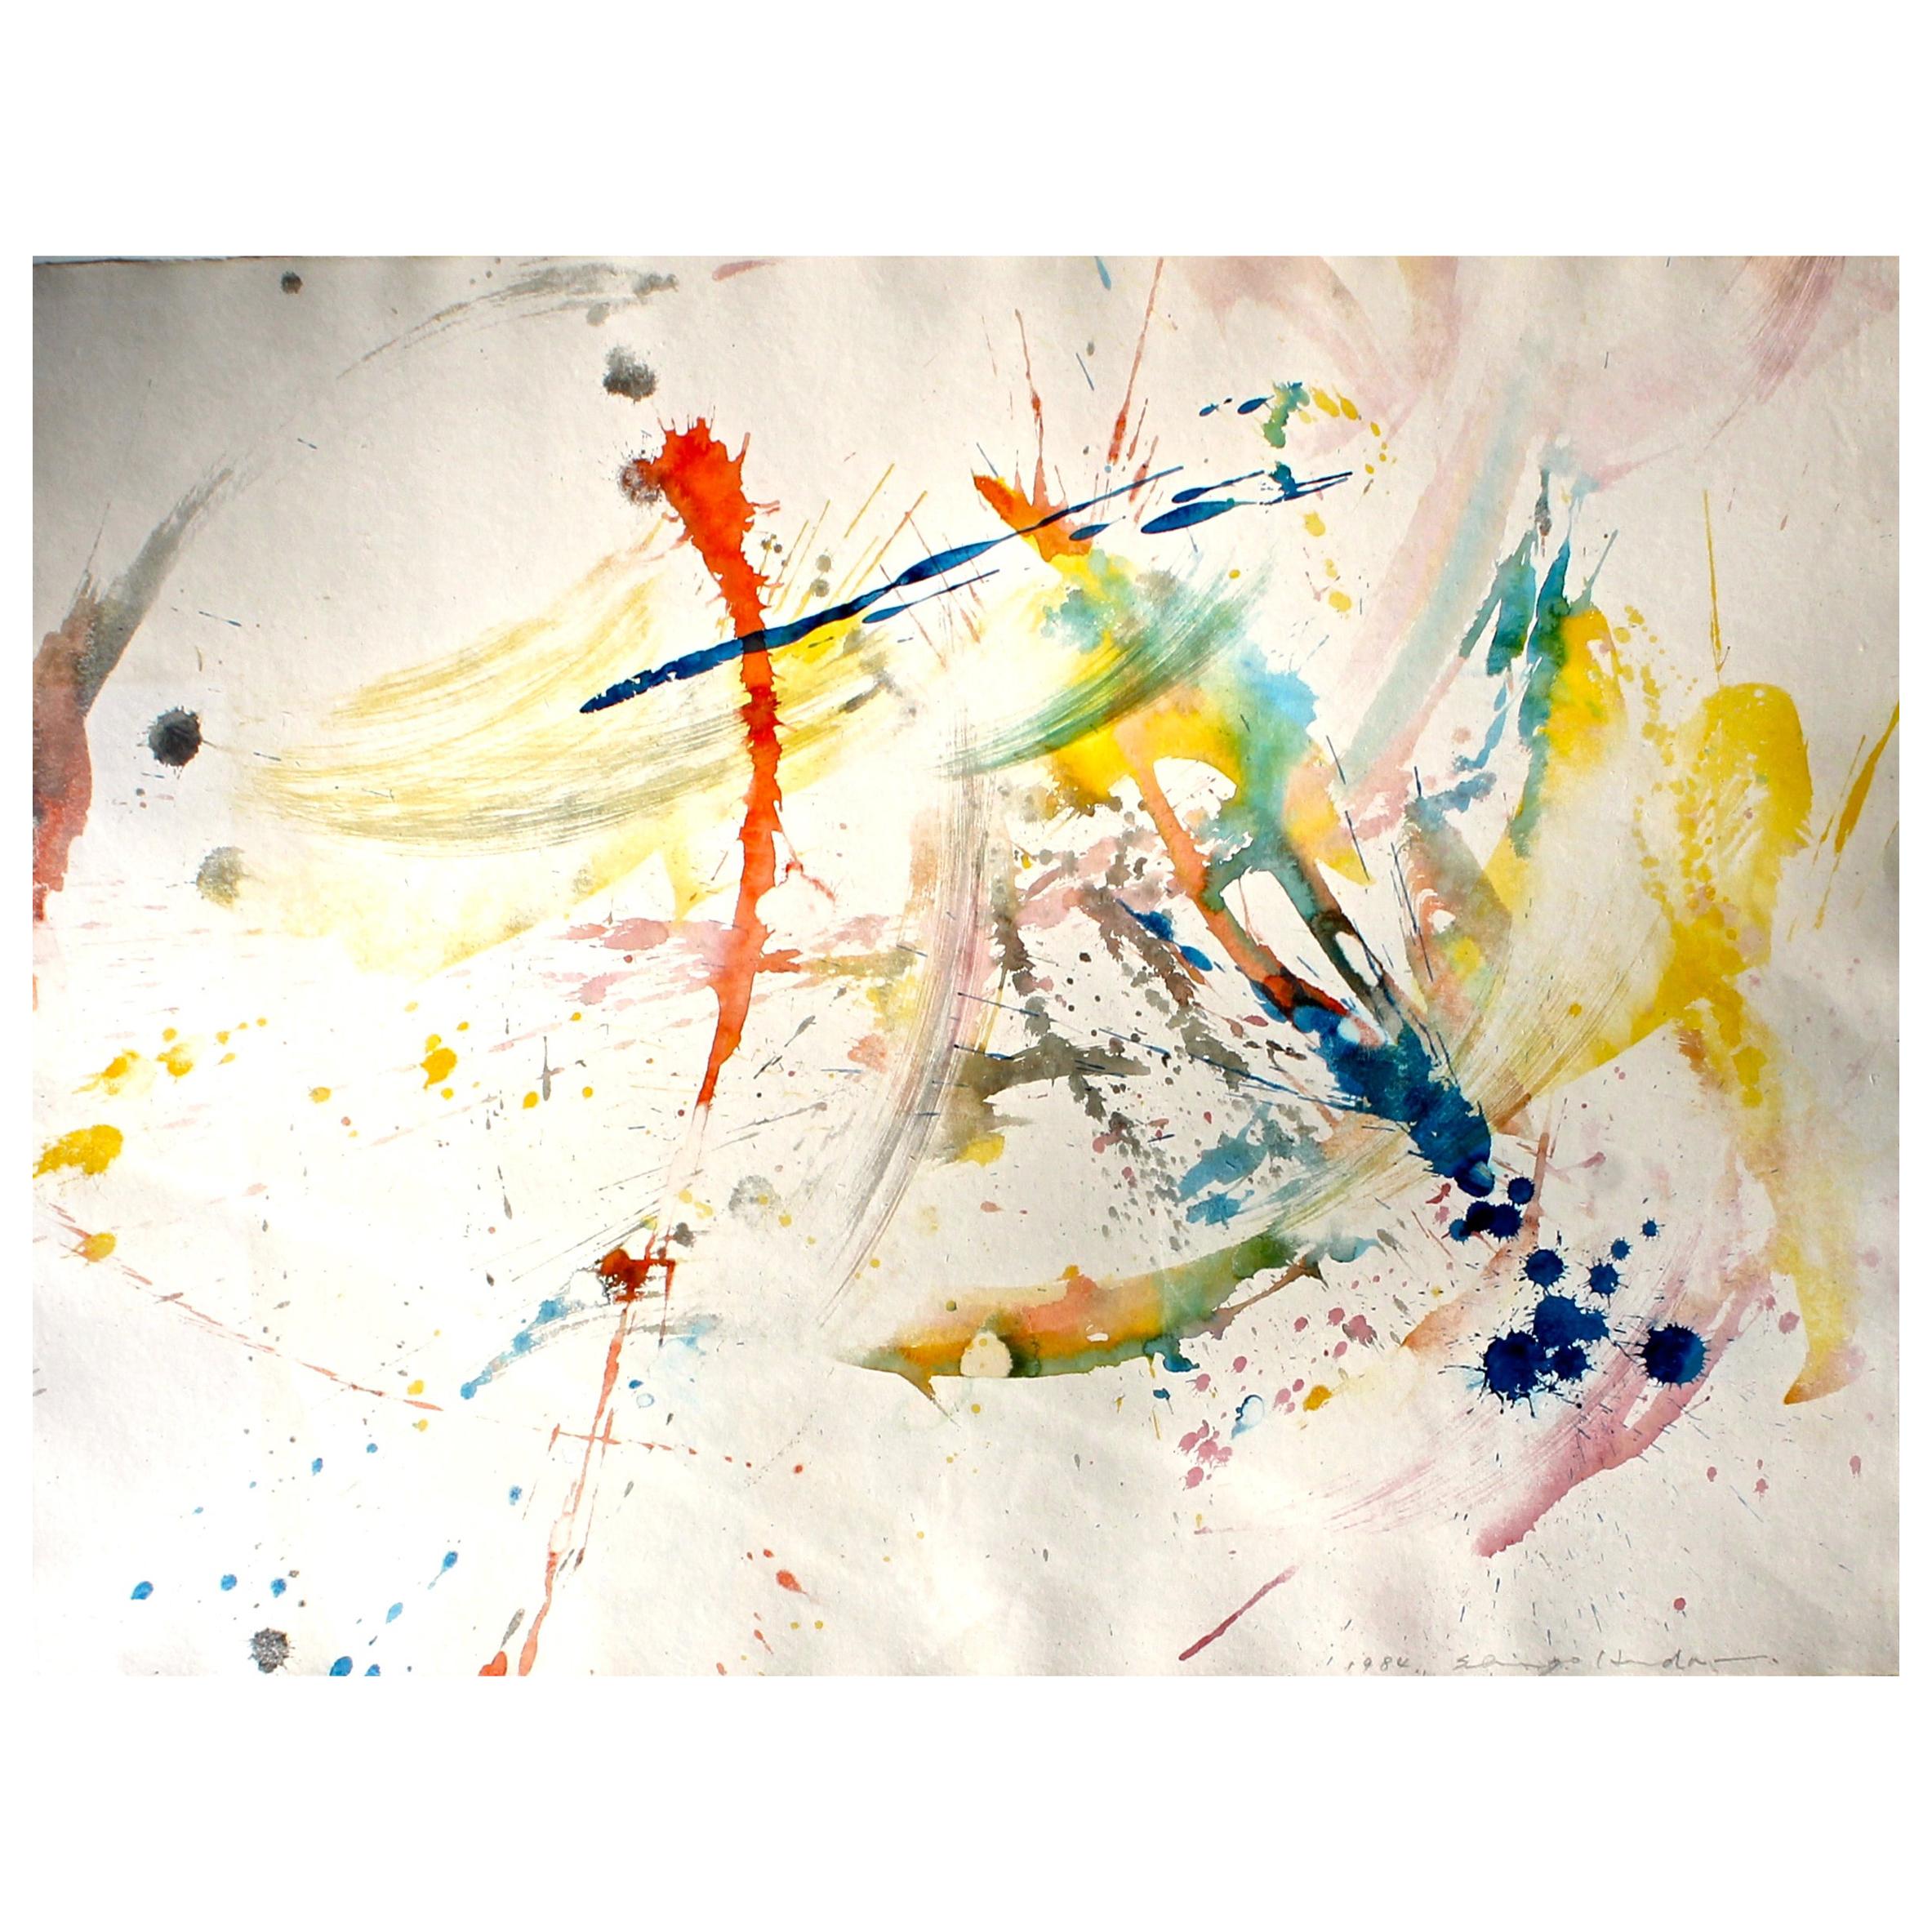 Shingo Honda  'To White Space' Series Abstract Expressionist Watercolor For Sale